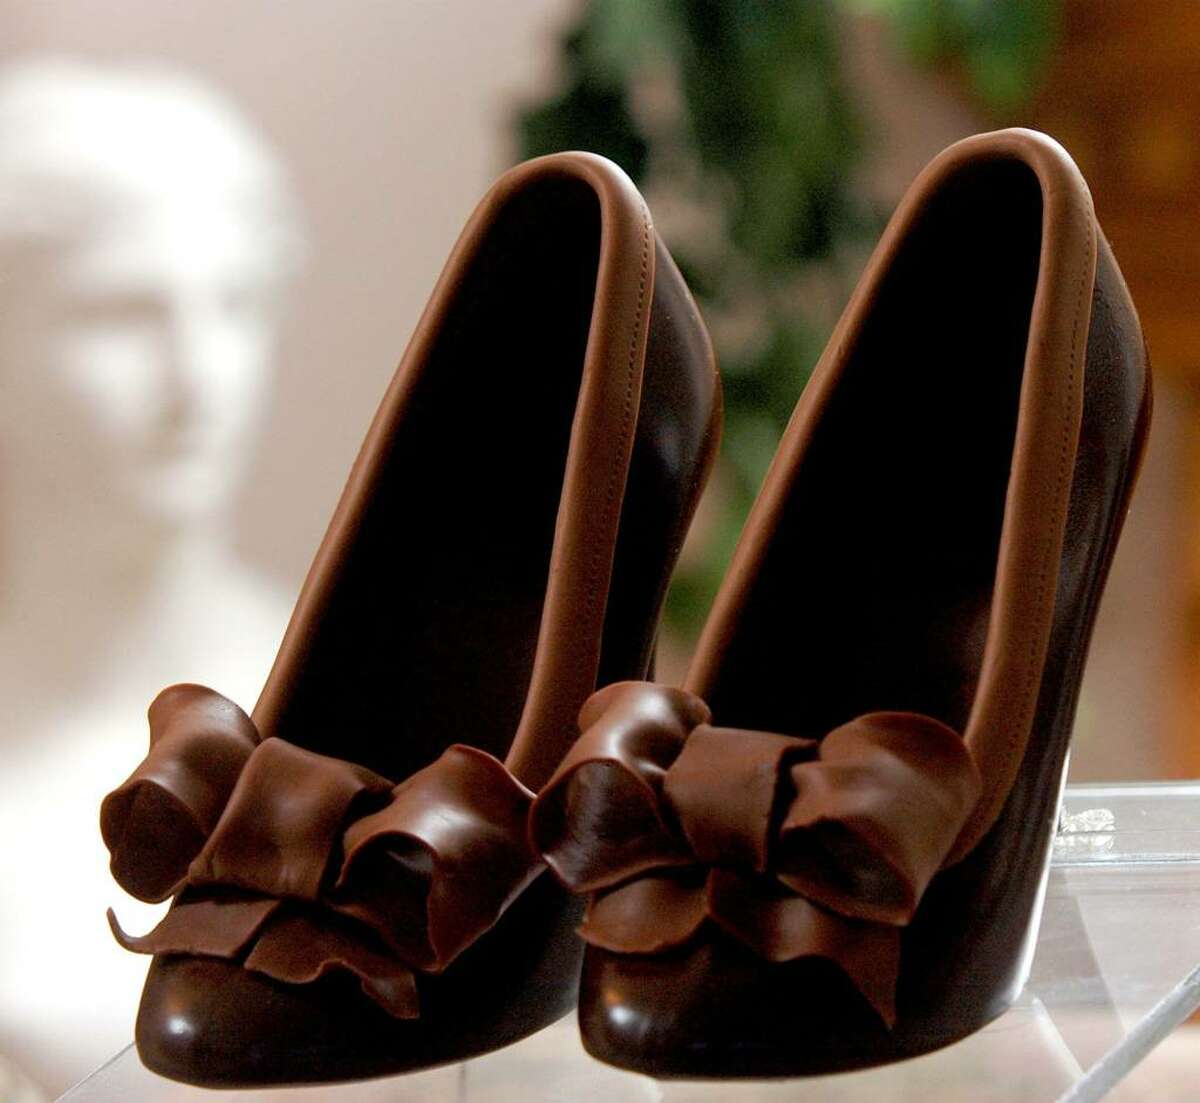 A pair of chocolate shoes.